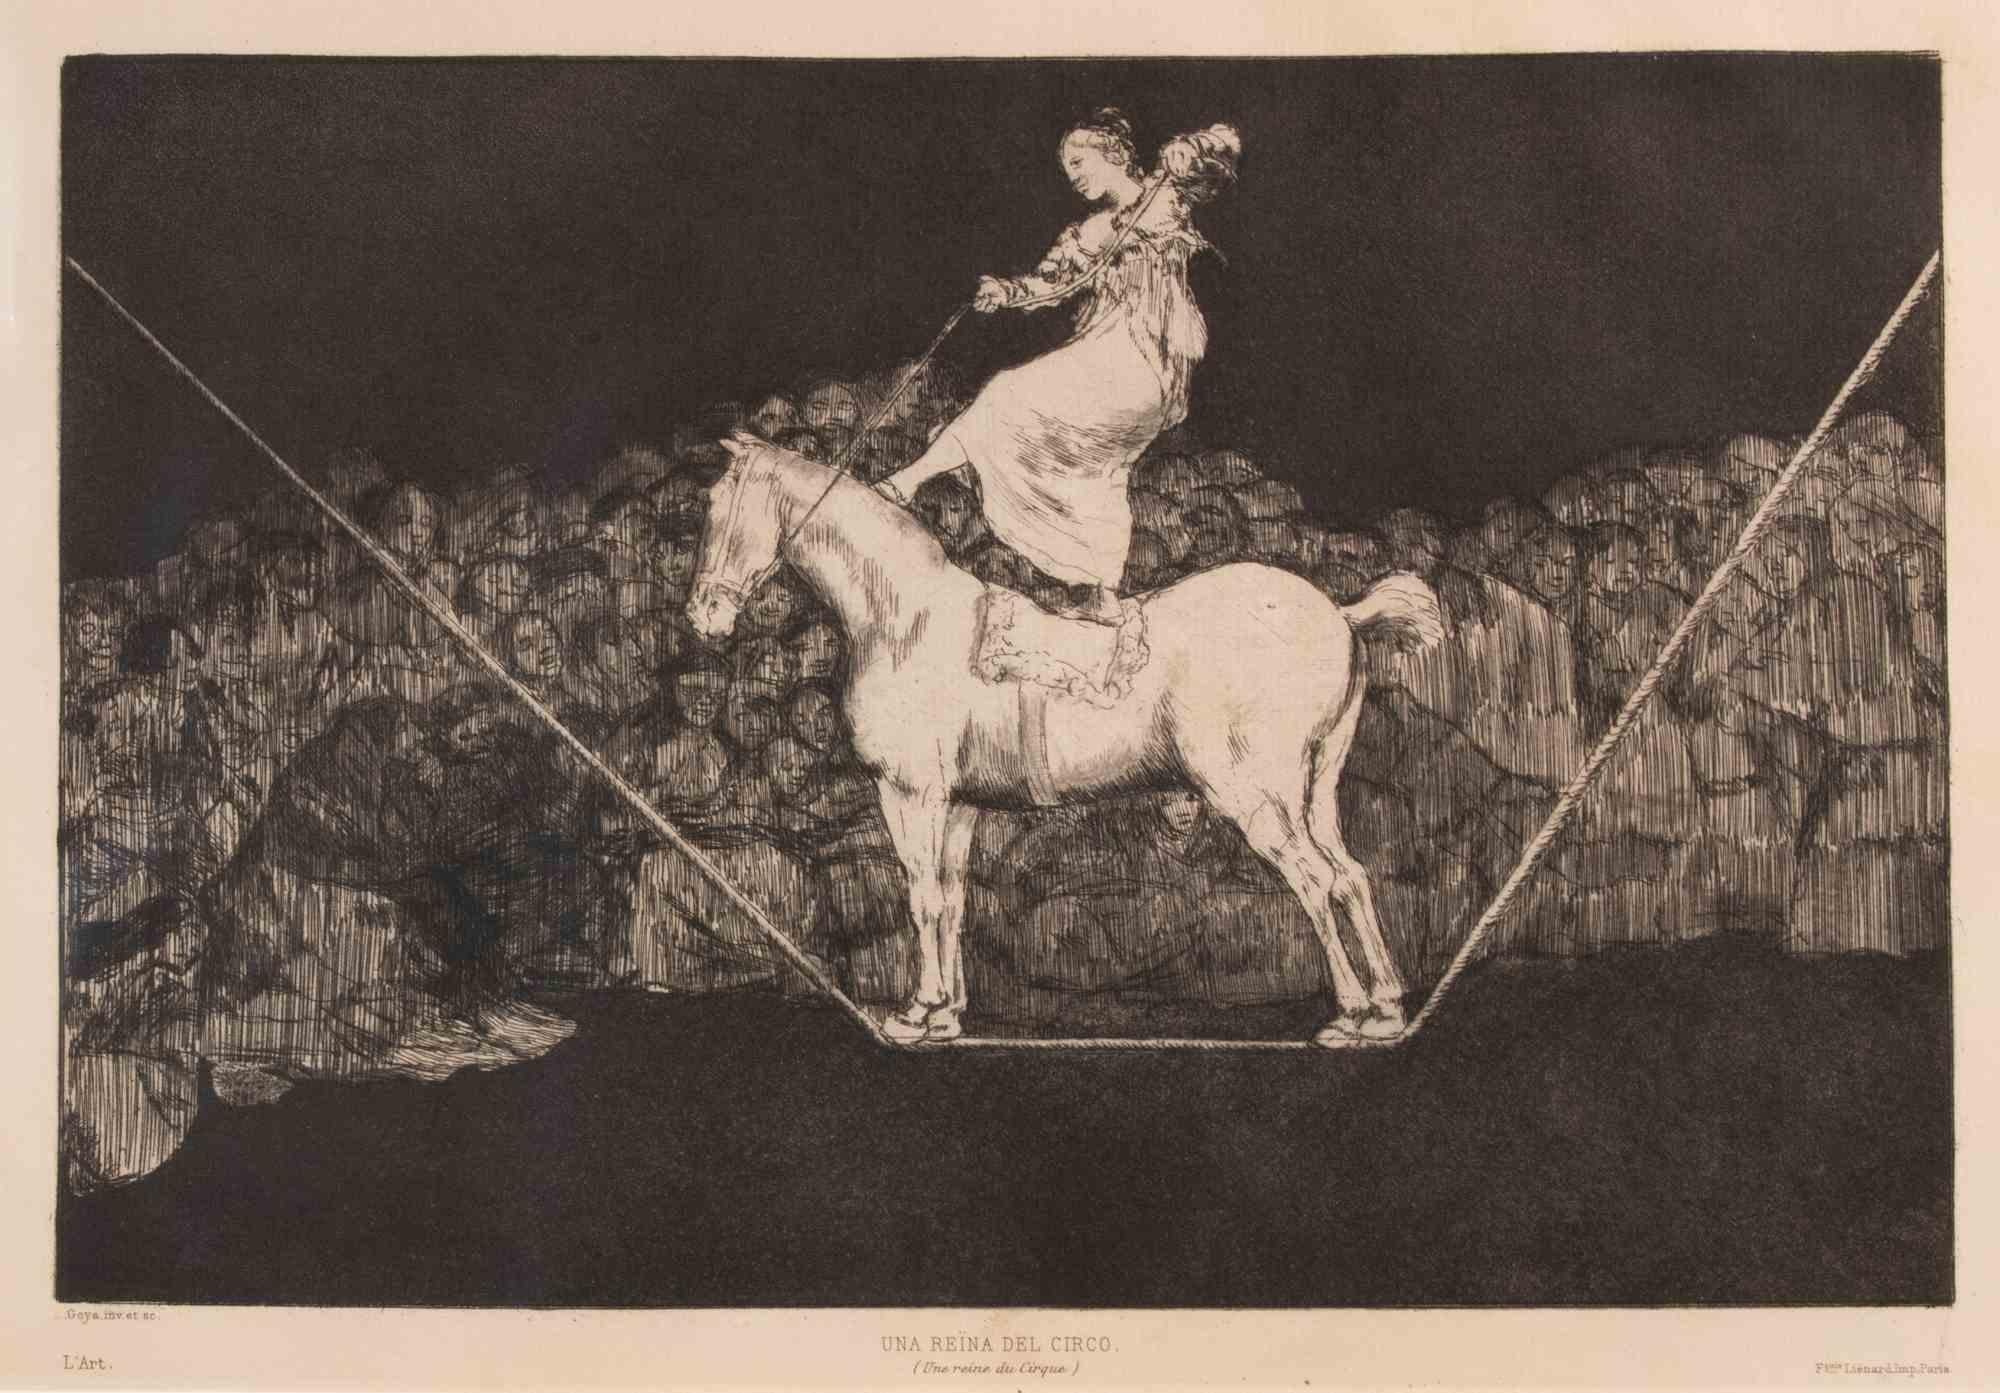 Una Reina del Circo is a modern artwork realized by Francisco Goya.

Etching and Aquatint, from the Series "Los Proverbios", realized in 1815.

This copy belongs to the edition of "L'Art", published in 1877.

Very good condition.